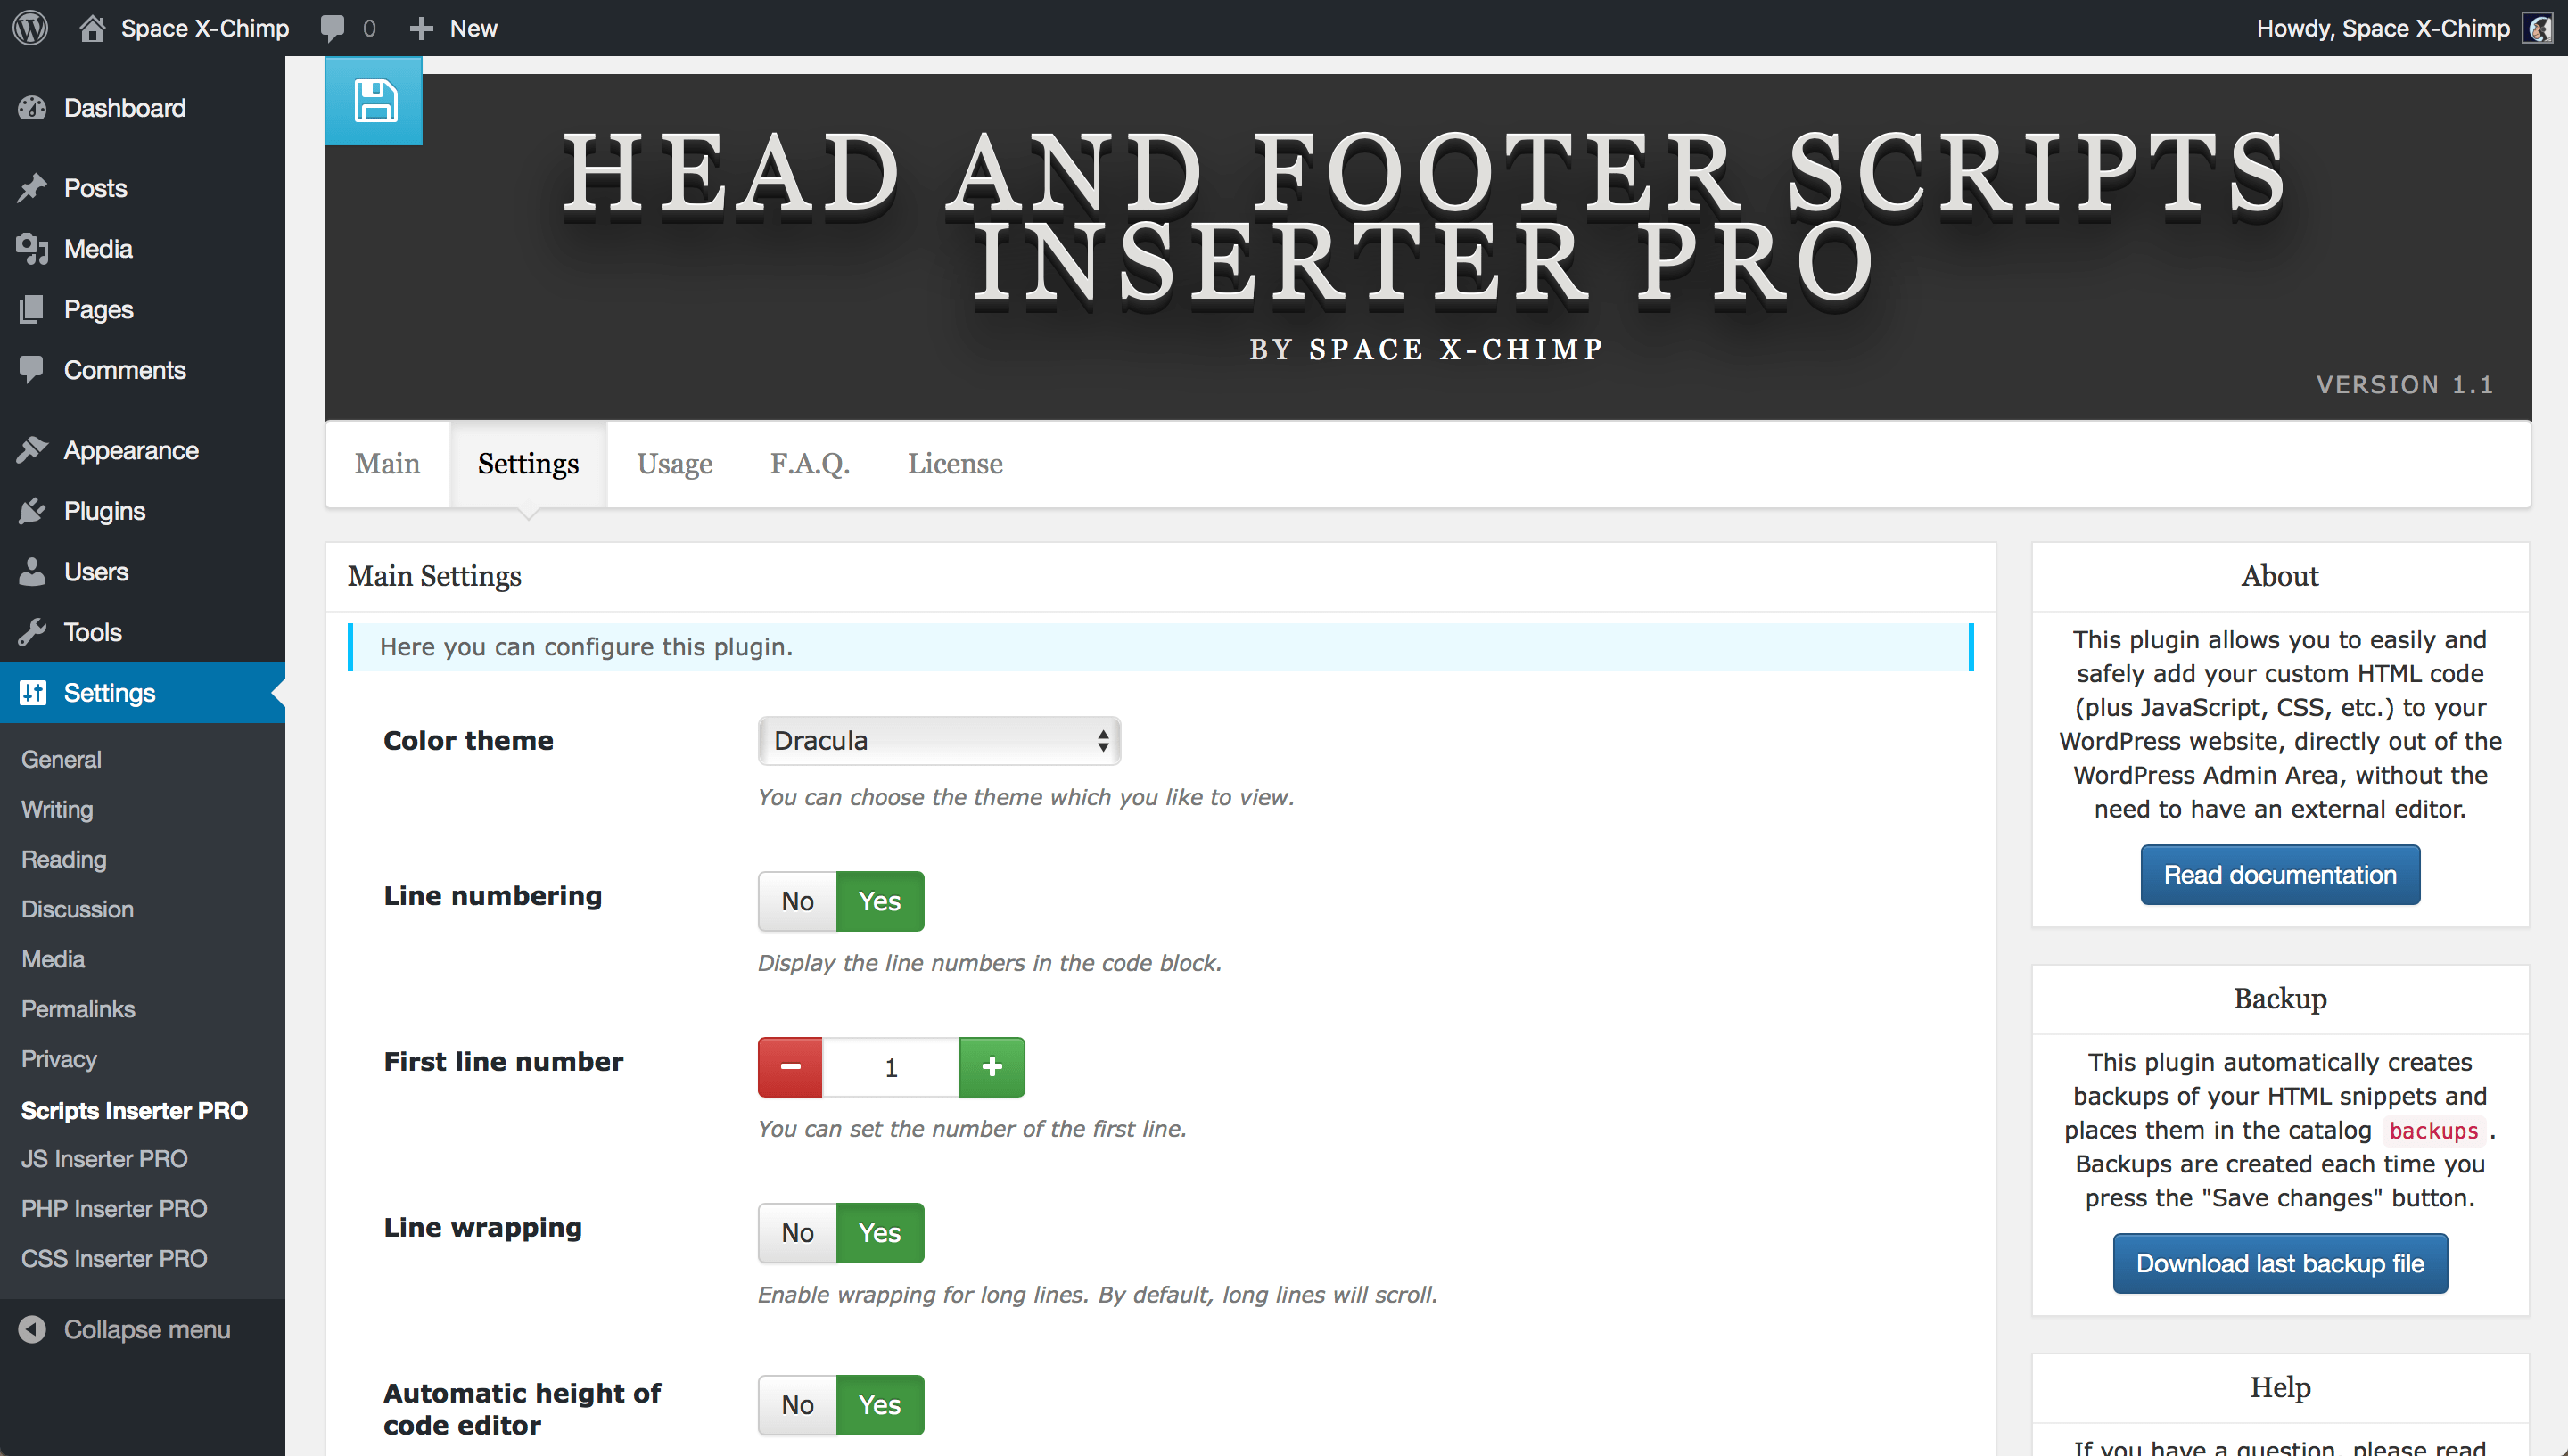 WP plugin "Head and Footer Scripts Inserter PRO" by Space X-Chimp